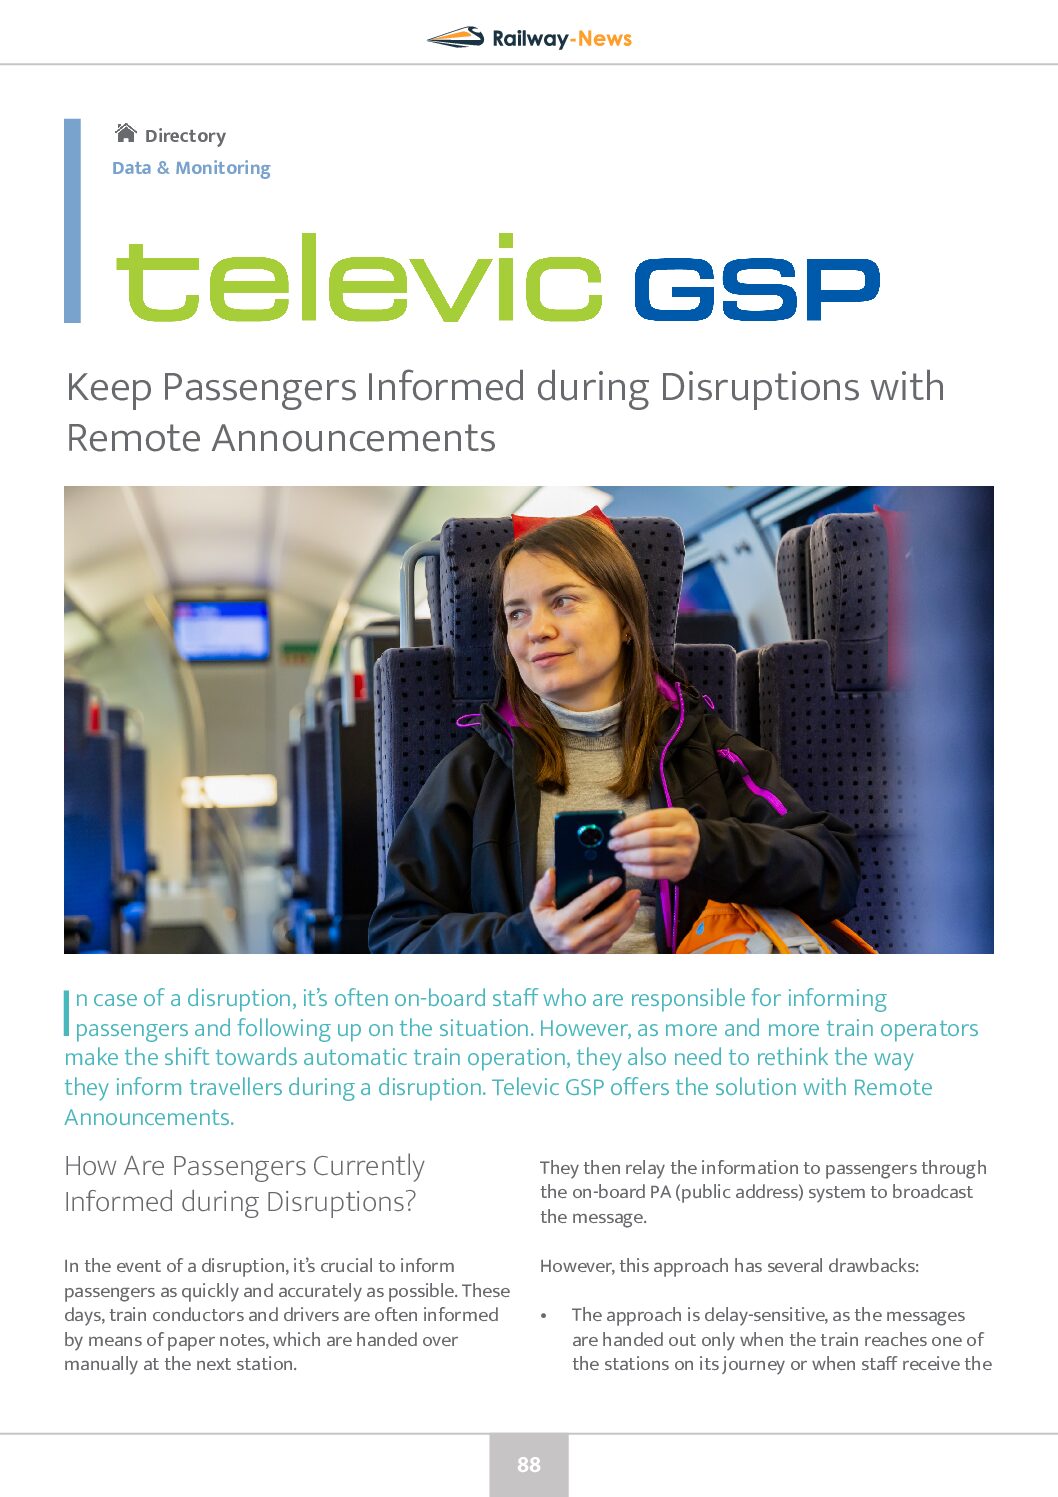 Keep Passengers Informed with Remote Announcements